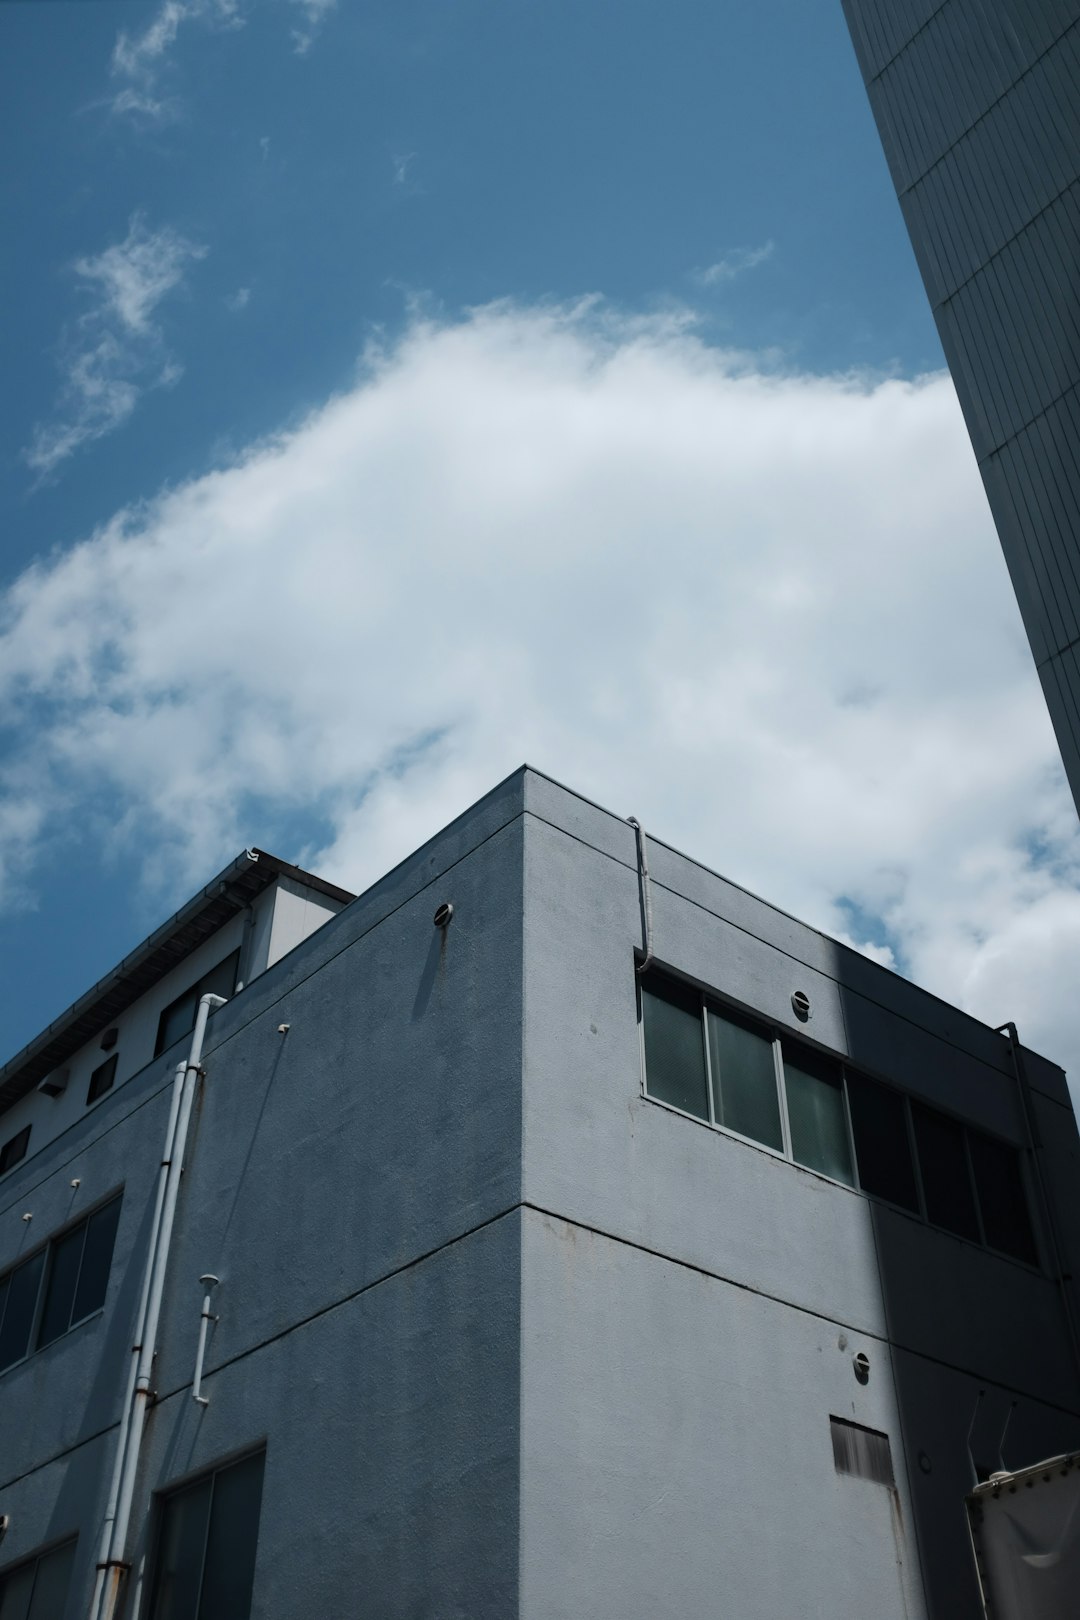 gray concrete building under blue sky during daytime